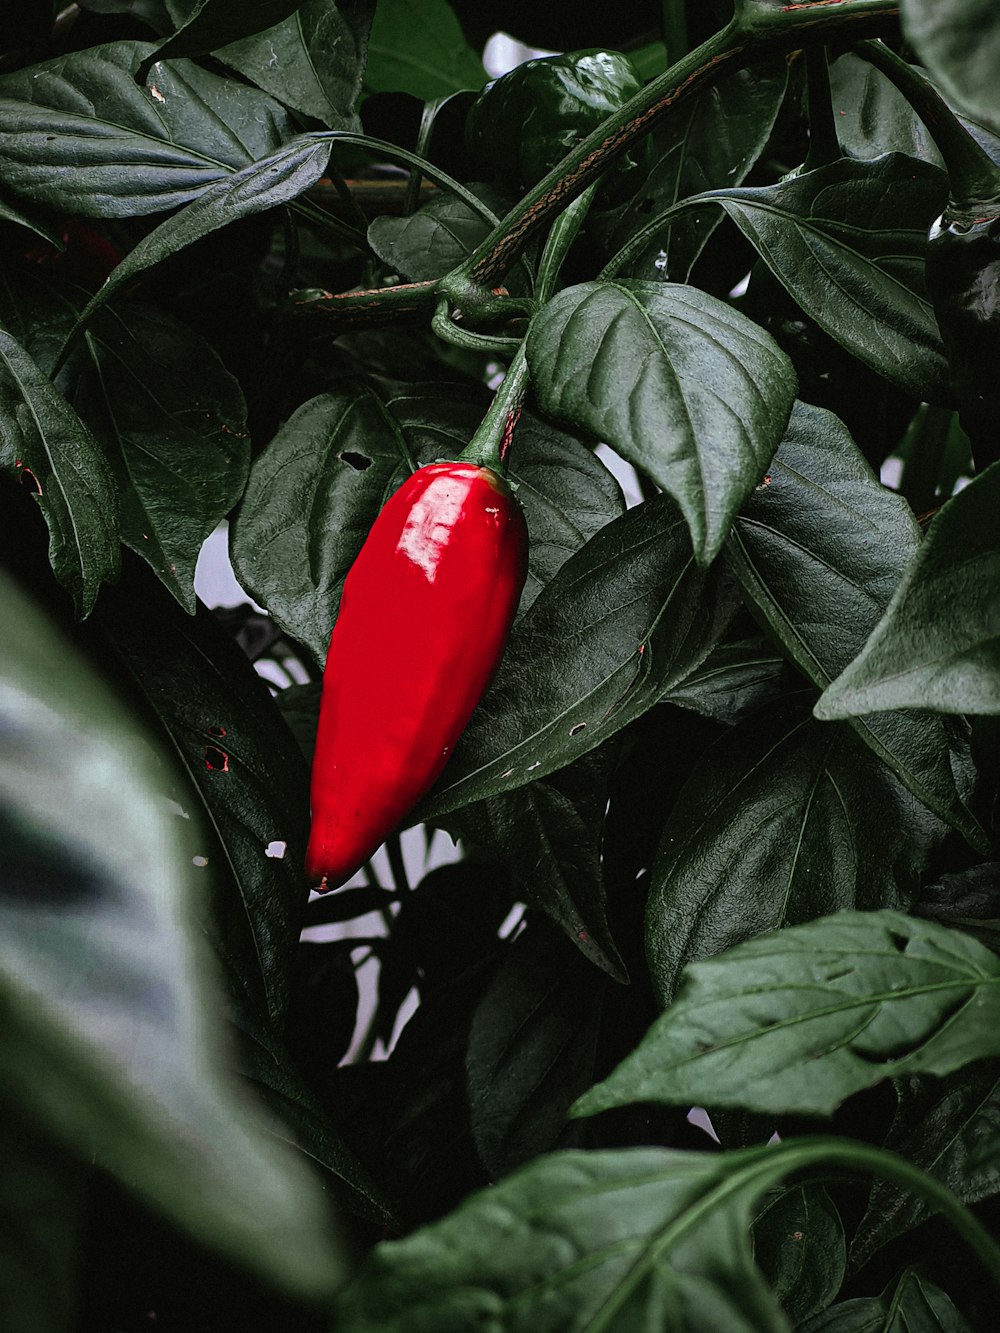 a red pepper growing on a plant with green leaves